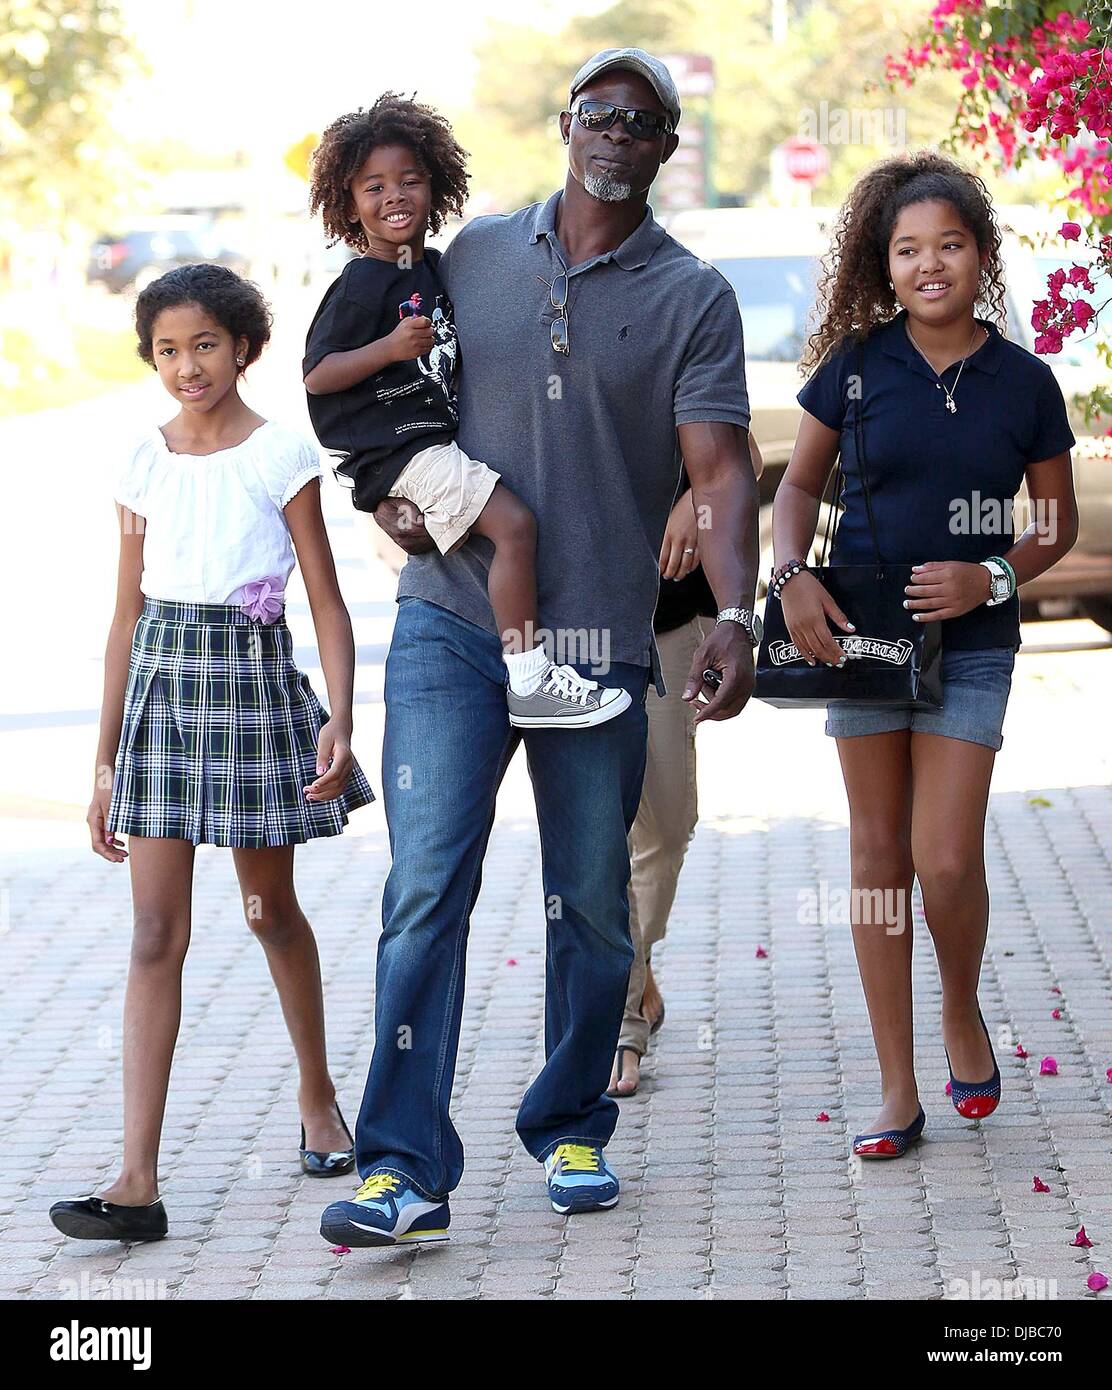 Kenzo Lee Hounsou, Djimon Hounsou, Ming Lee Simmons and Aoki Lee Simmons  Djimon Hounsou at the Malibu Country Mart with his stepdaughters and son  Los Angeles, California  Stock Photo - Alamy